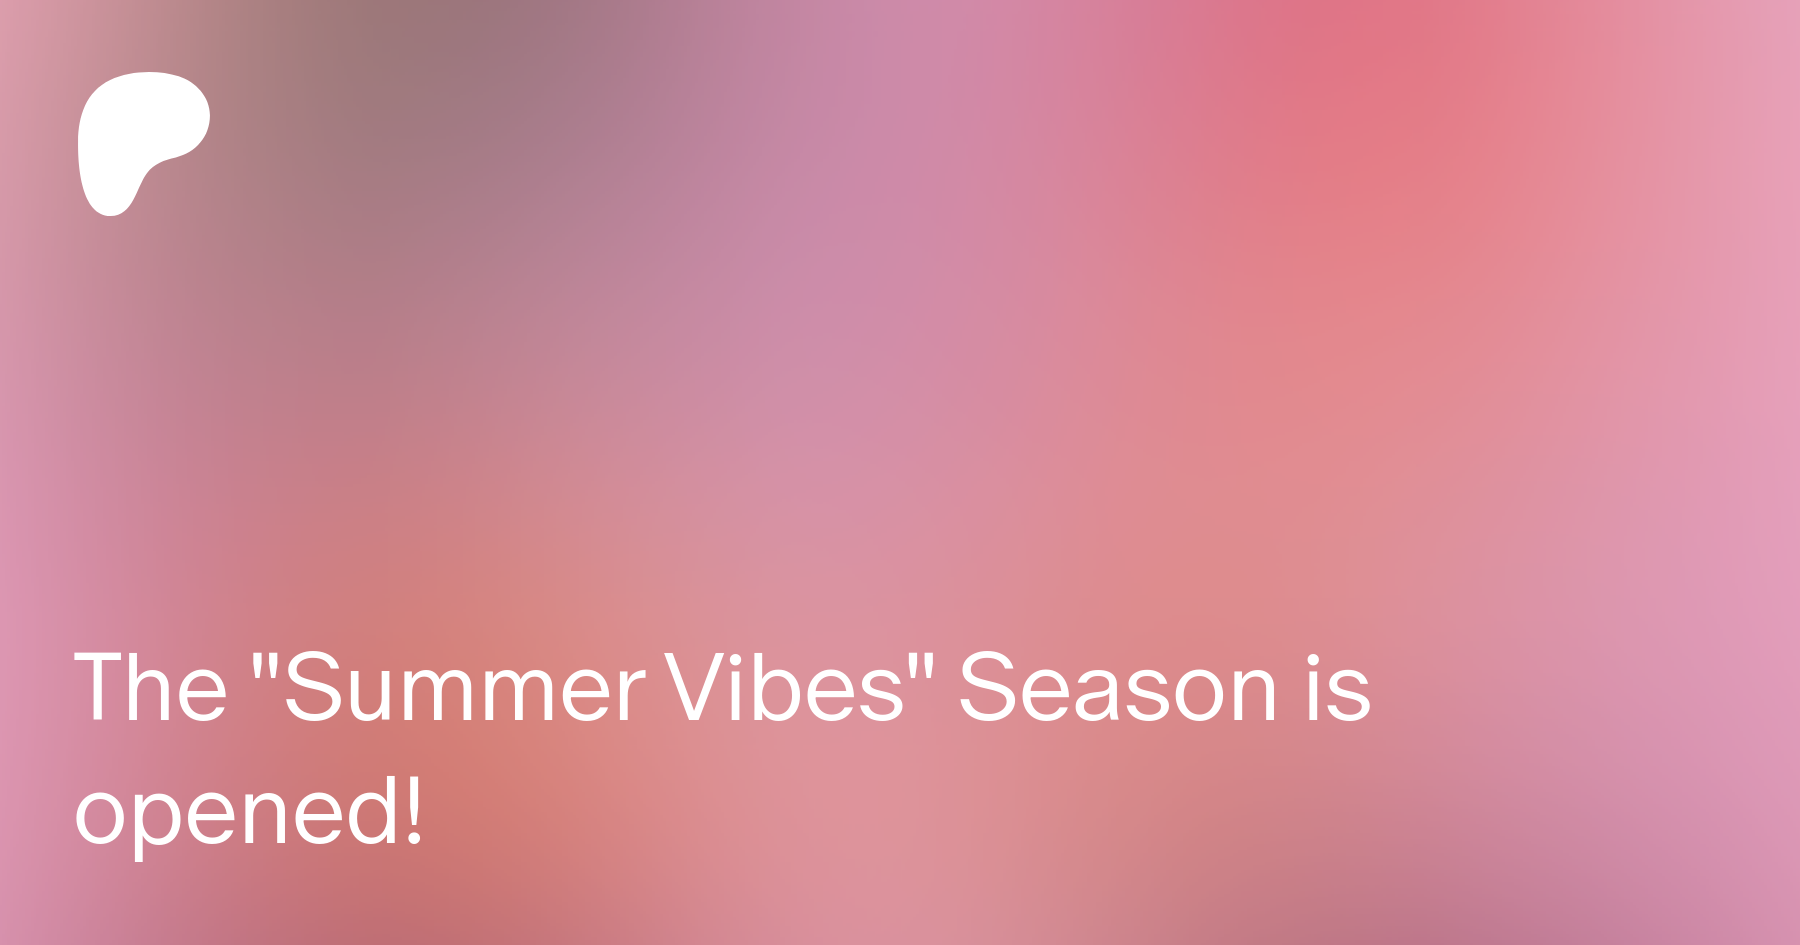 The Summer Vibes Season is opened! | Patreon